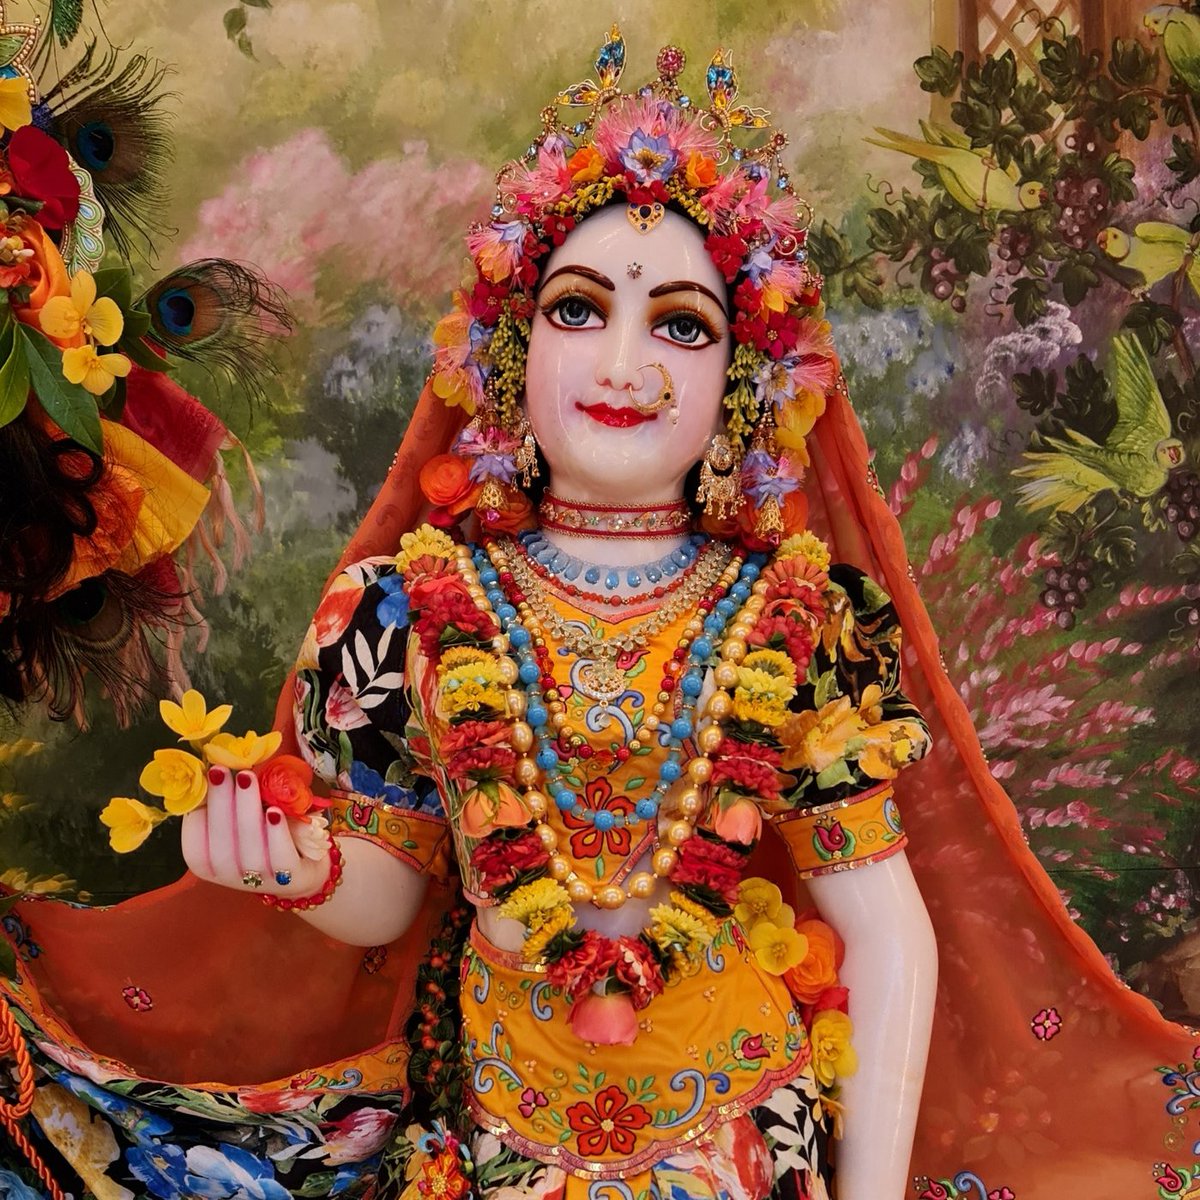 Even a mere sight of the deities of Lord Krishna and Radha is enough to calm your mind and soothe your soul.